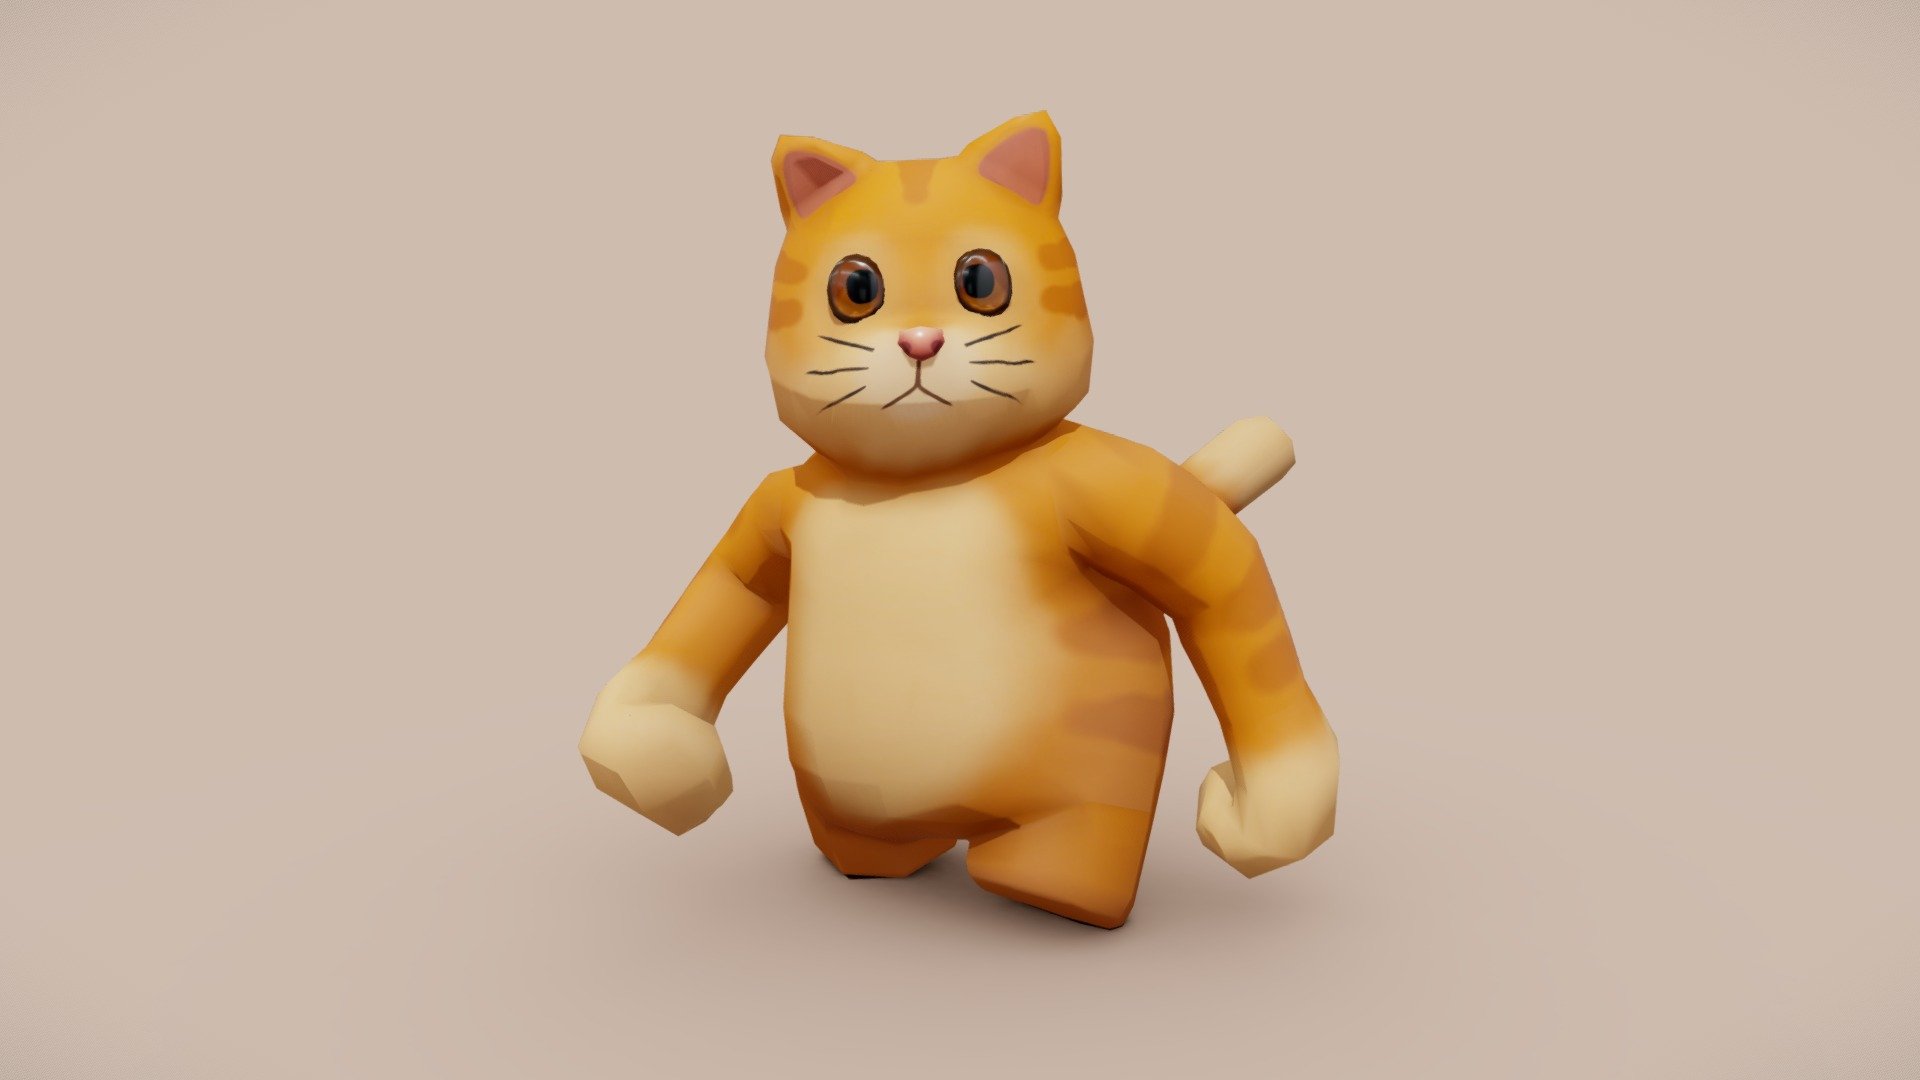 Cute Cat for your renders and games

Rig Information:

Rigged mesh

Animation: none

Textures:

Diffuse color, Roughness

All textures are 2K

Files Formats:

Blend

Fbx

Obj - Cute Cat - Buy Royalty Free 3D model by Vanessa Araújo (@vanessa3d) 3d model